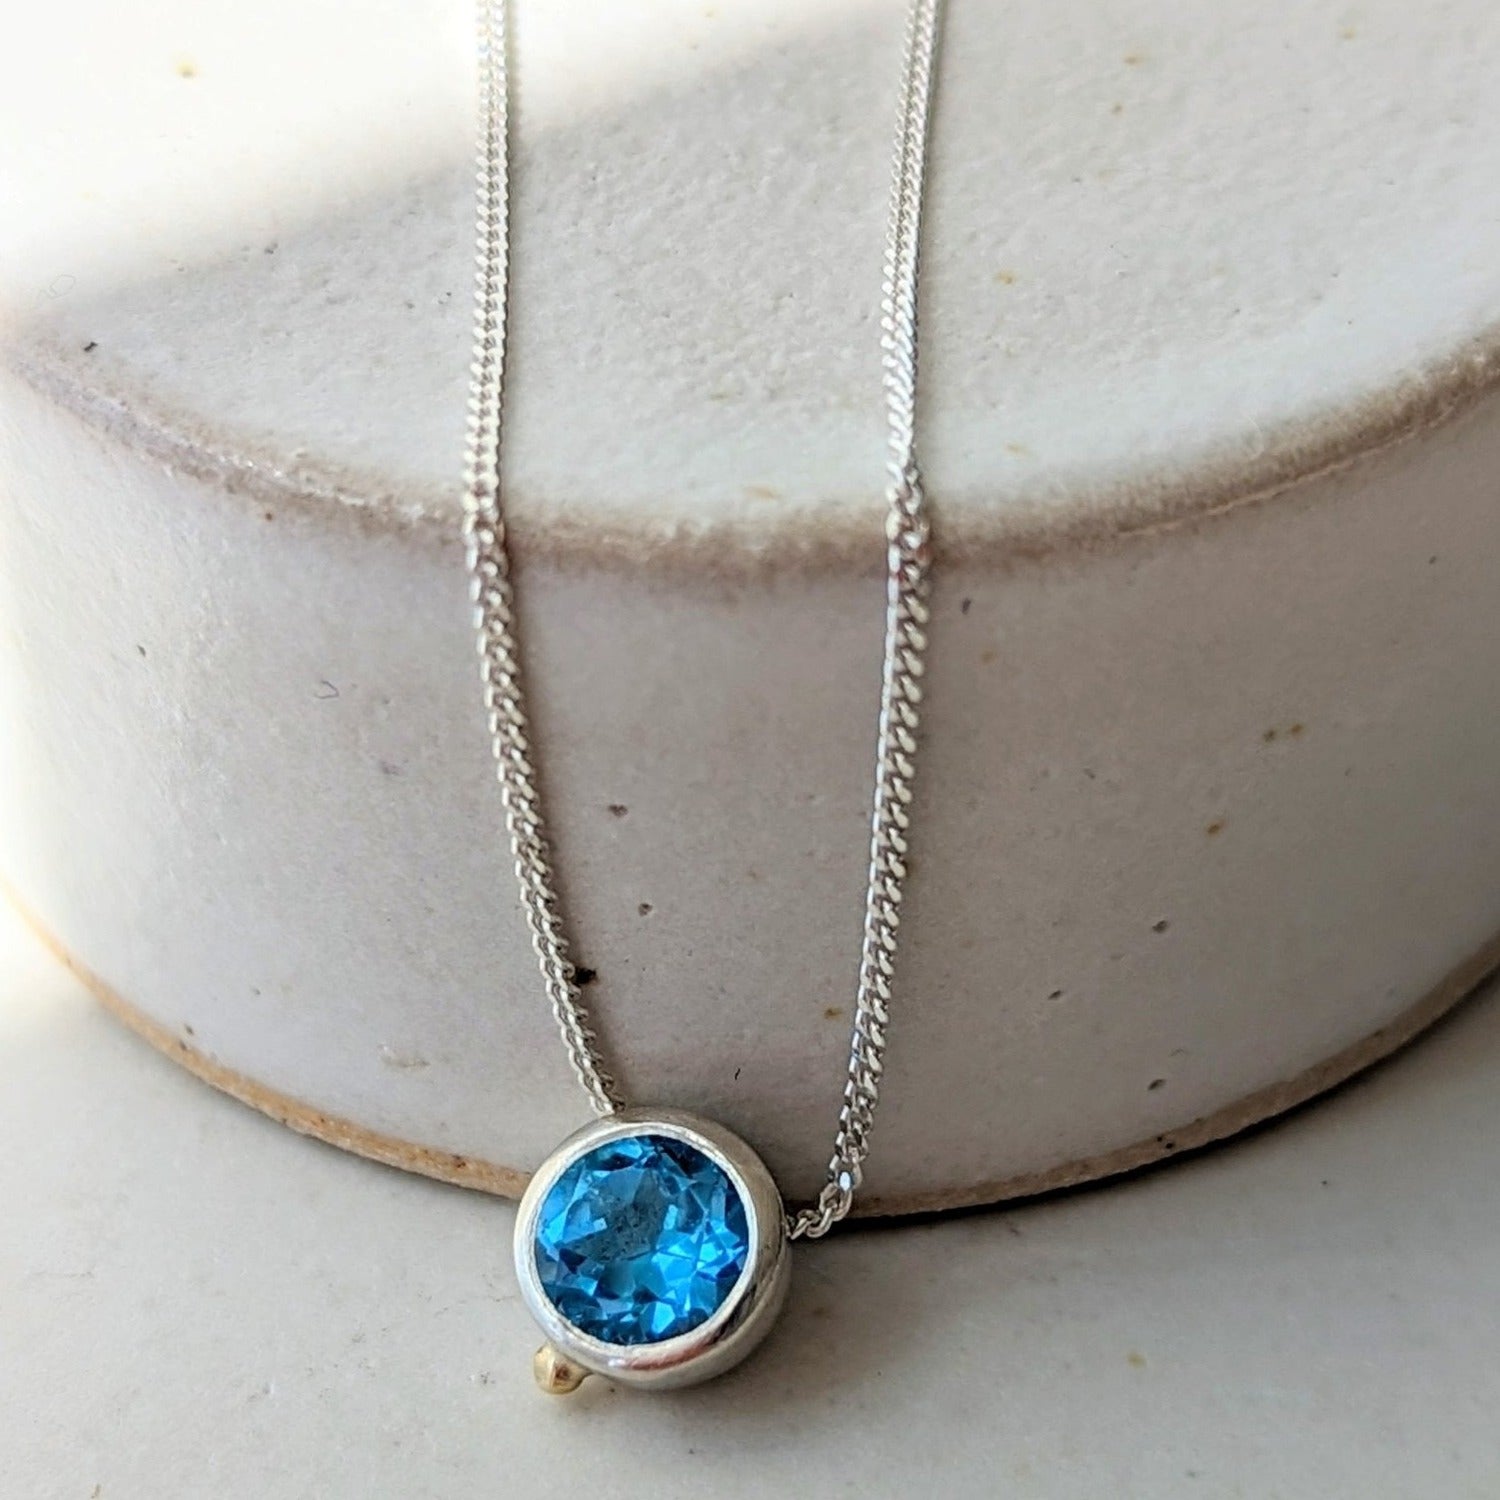 Handcrafted Daria Swiss Blue Topaz Necklace with 16-inch Sterling Silver Chain from Ocean Collection in Cornwall. Capturing the essence of Cornwall's seas. Handcrafted with a 16-inch Sterling Silver Chain and a beautiful 5mm Topaz.